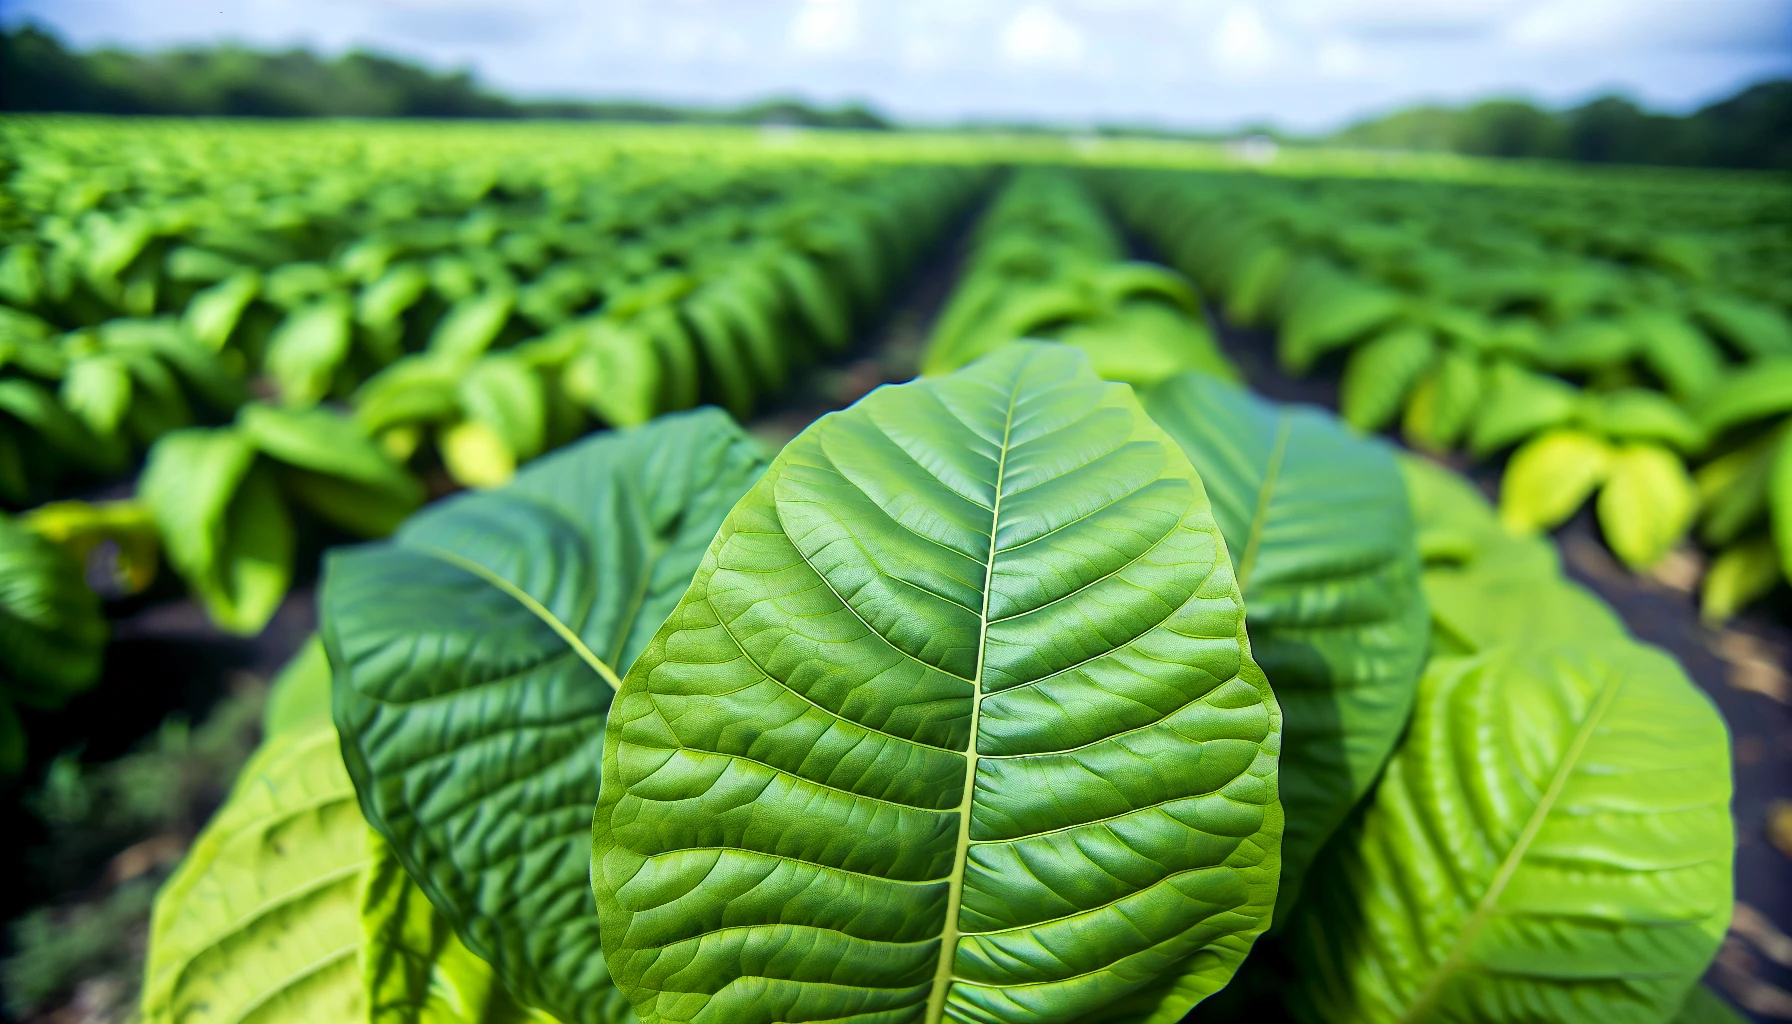 Rich and flavorful tobacco leaves in a Nicaraguan plantation